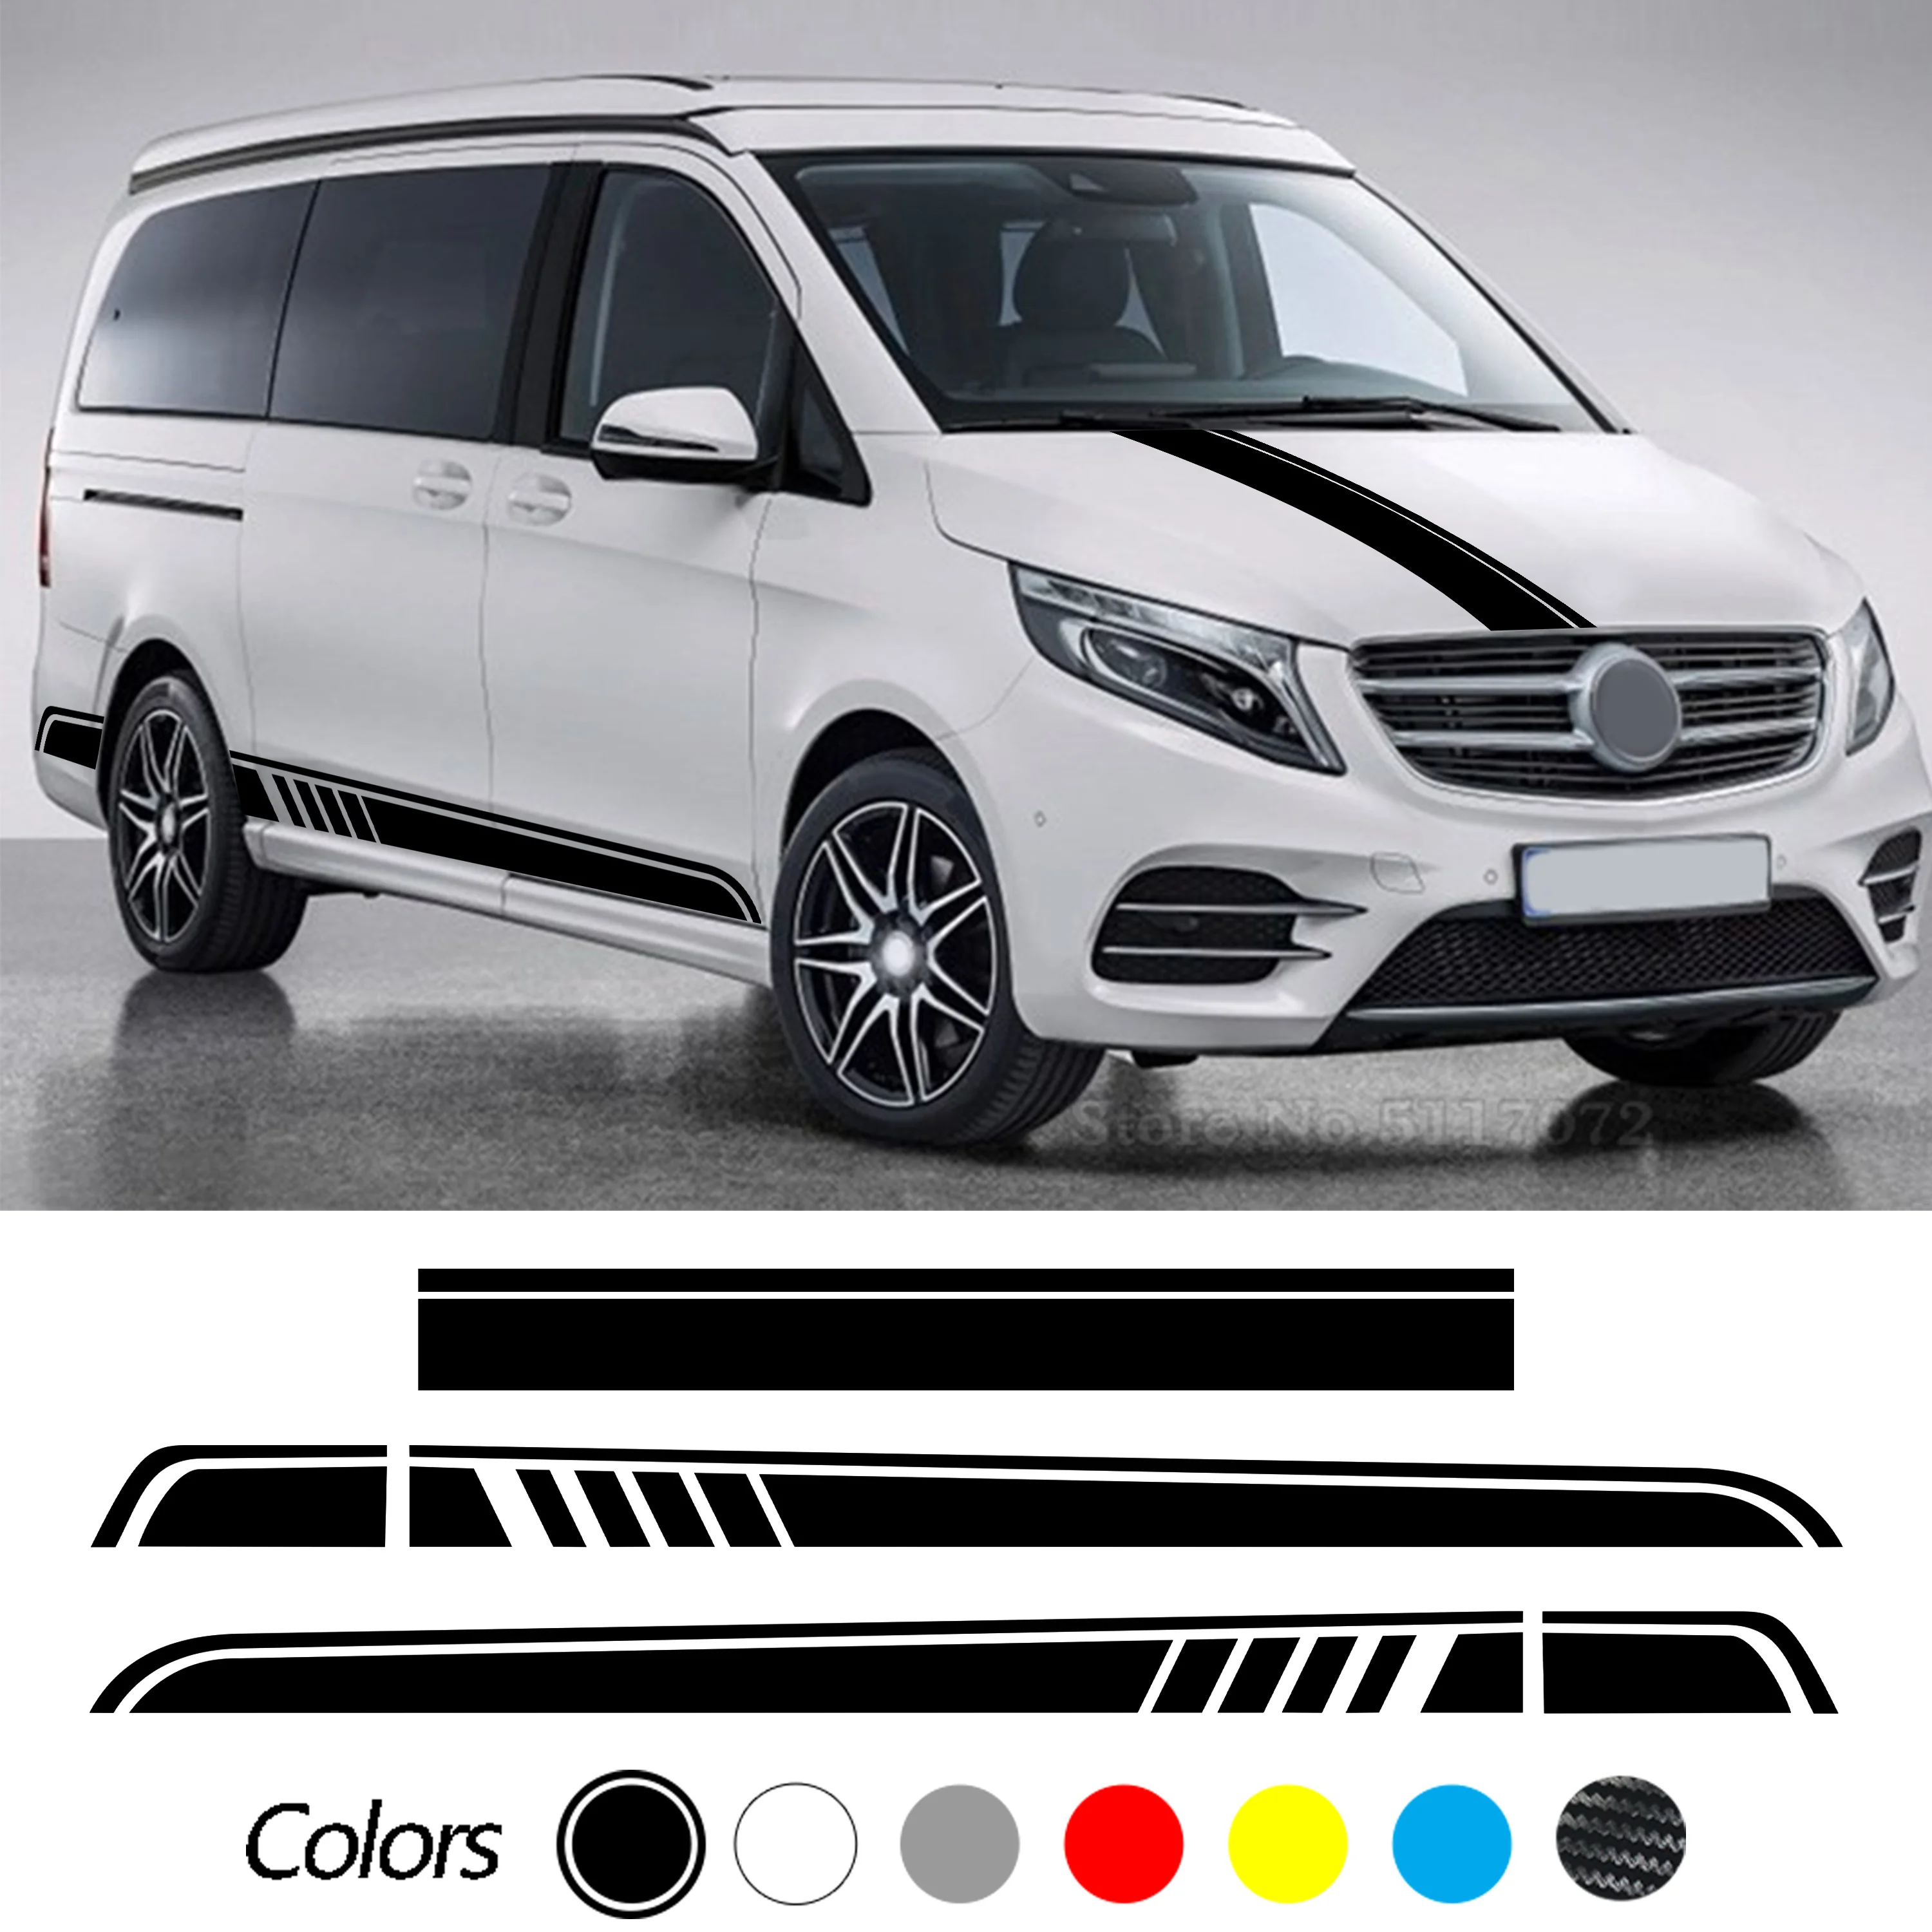 

3 Pcs Car Hood Decal Side Stripes Skirt Sticker For Mercedes Benz V Class W447 Vito Viano 2014-Present AMG Accessories